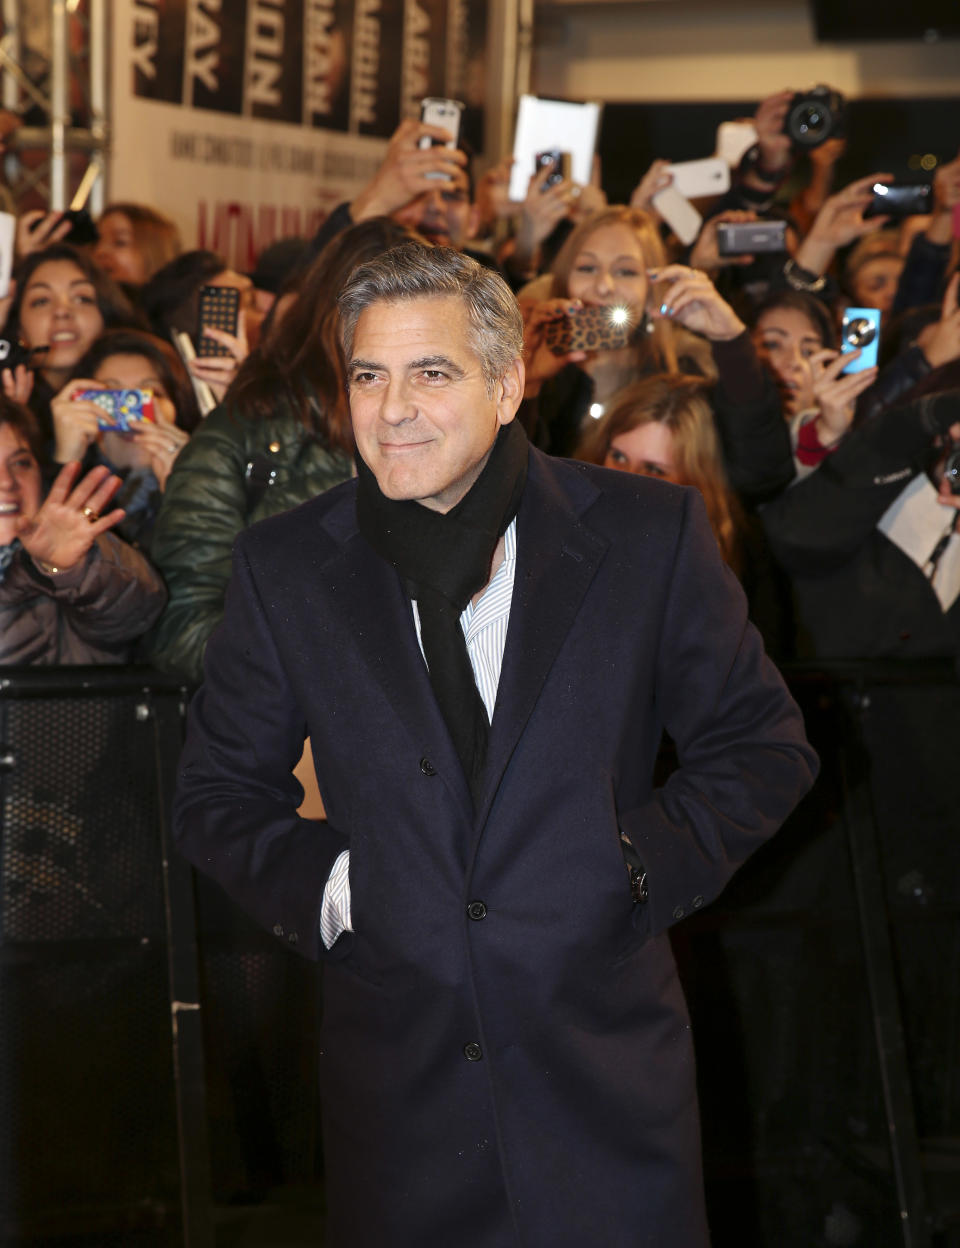 American actor George Clooney poses for photographers on the red carpet for the screening of the movie "Monuments Men ", in Pioltello, near Milan, Italy, Monday, Feb. 10, 2014. (AP Photo/Antonio Calanni)